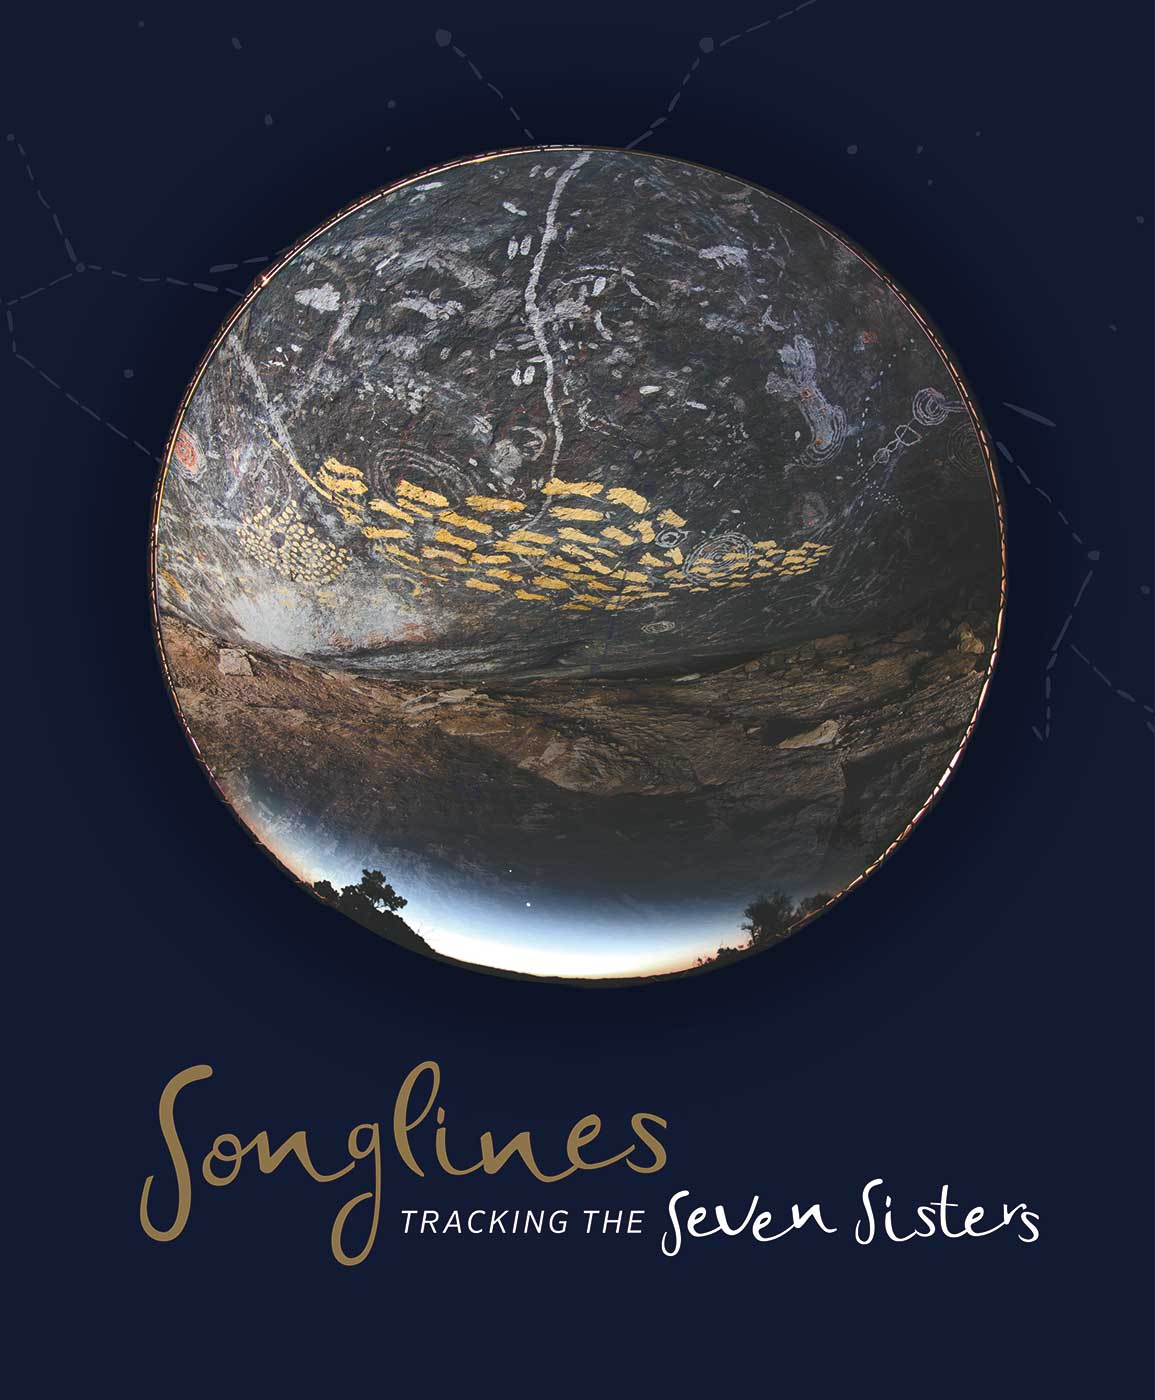 Front cover of the Songlines catalogue